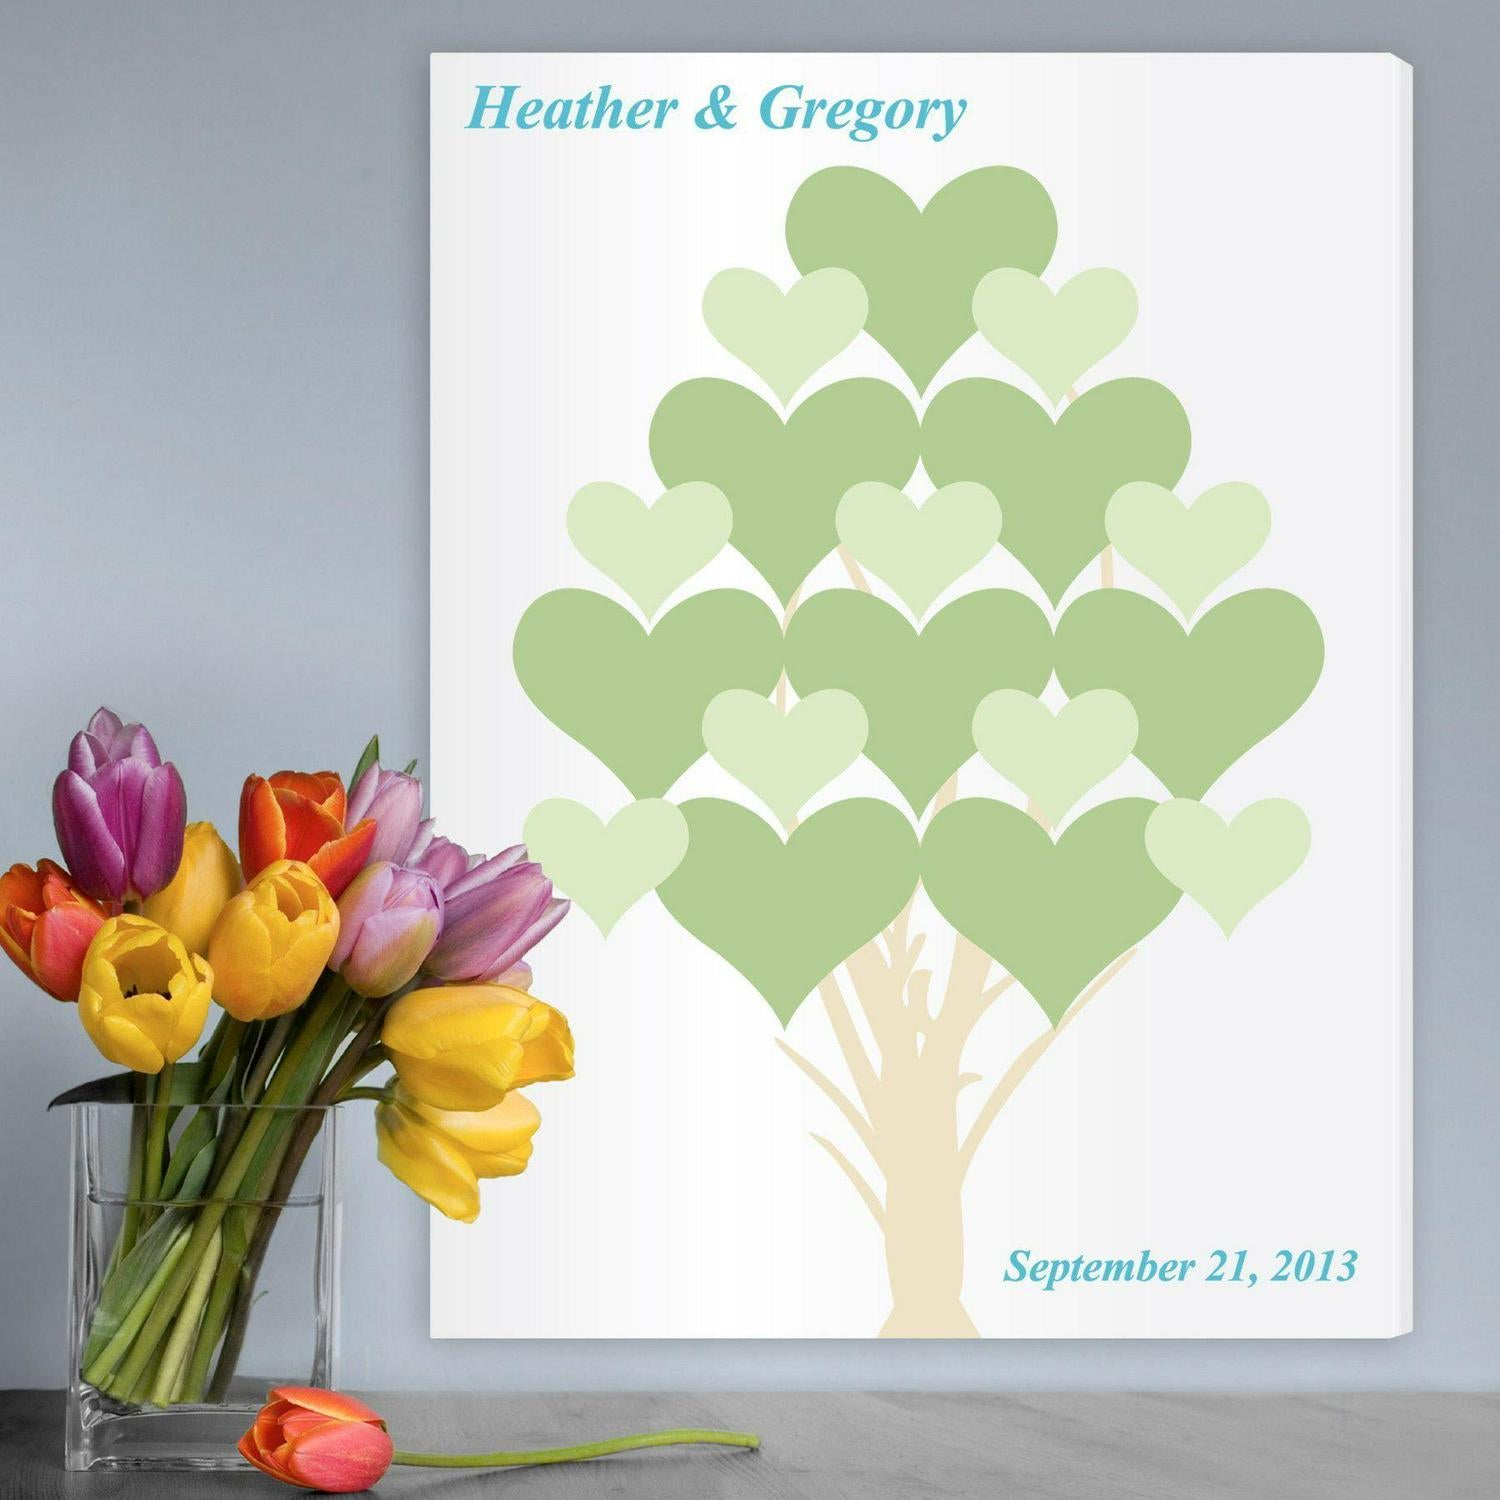 Personalized Guestbook Canvas - Flourishing Hearts